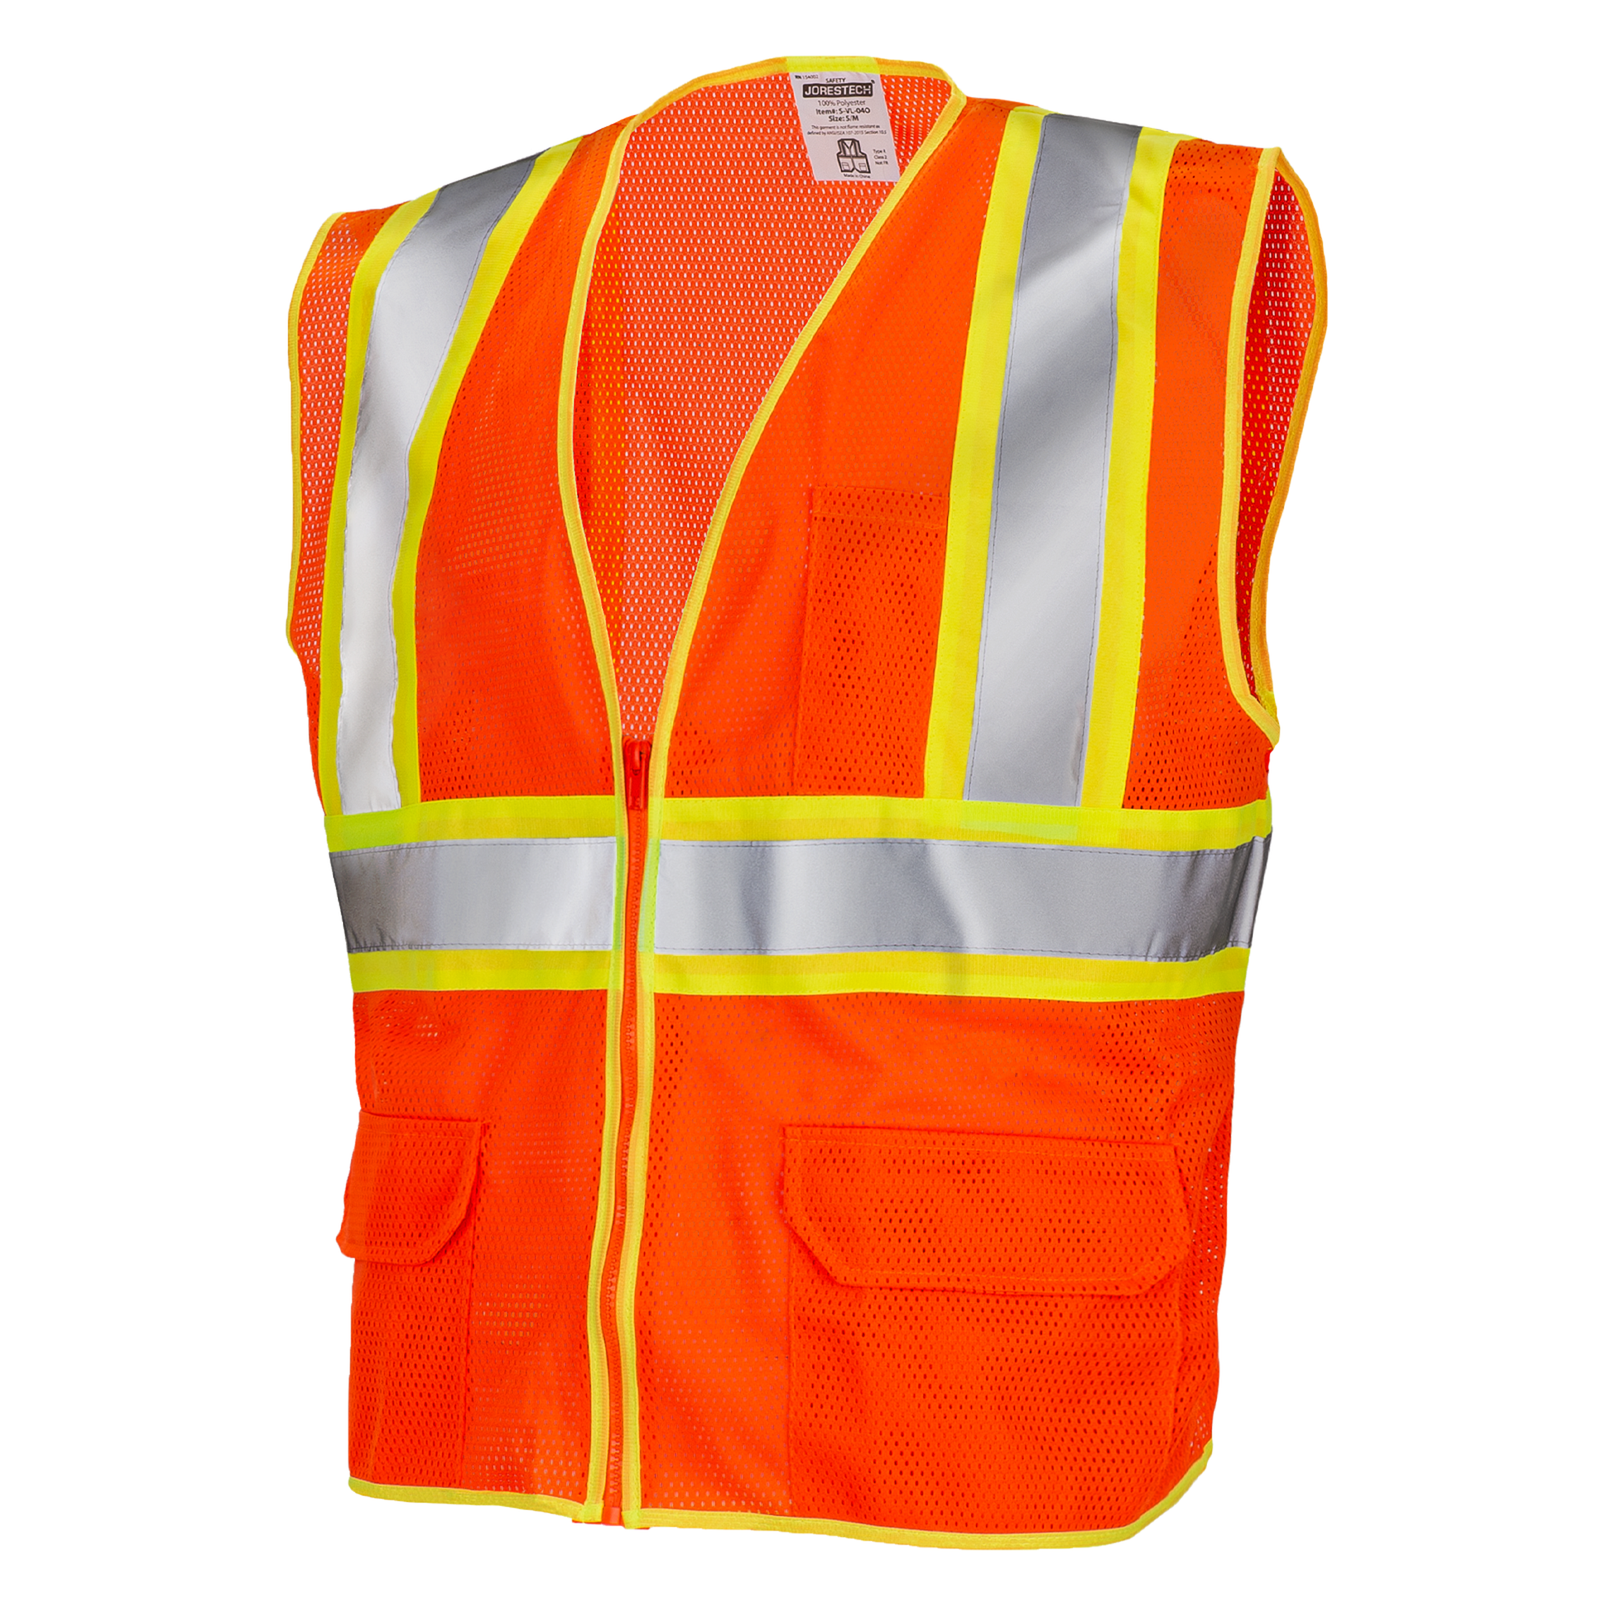 Diagonal view of the hi vis two toned Orange mesh safety vest Type R Class 2 with 2 inches reflective strip and pockets